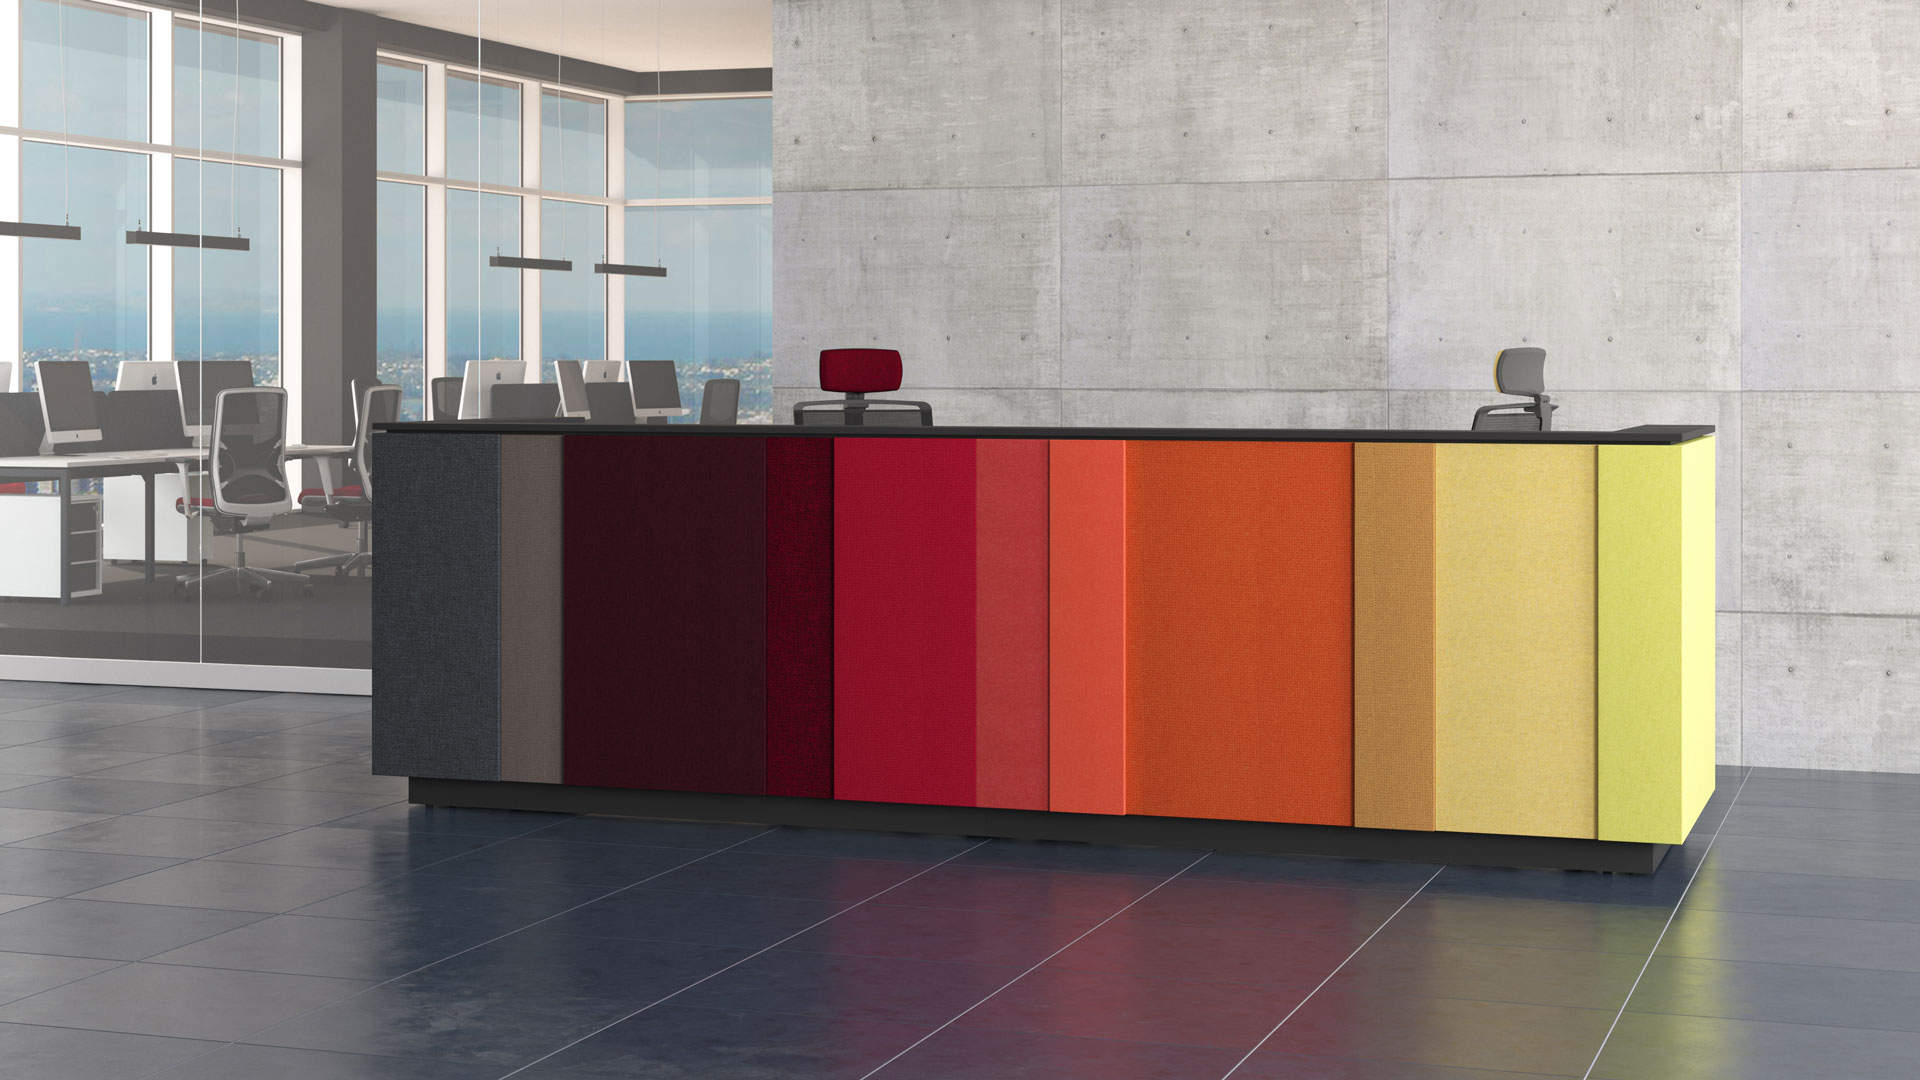 Domino offers an appealing first impression to workplace visitors